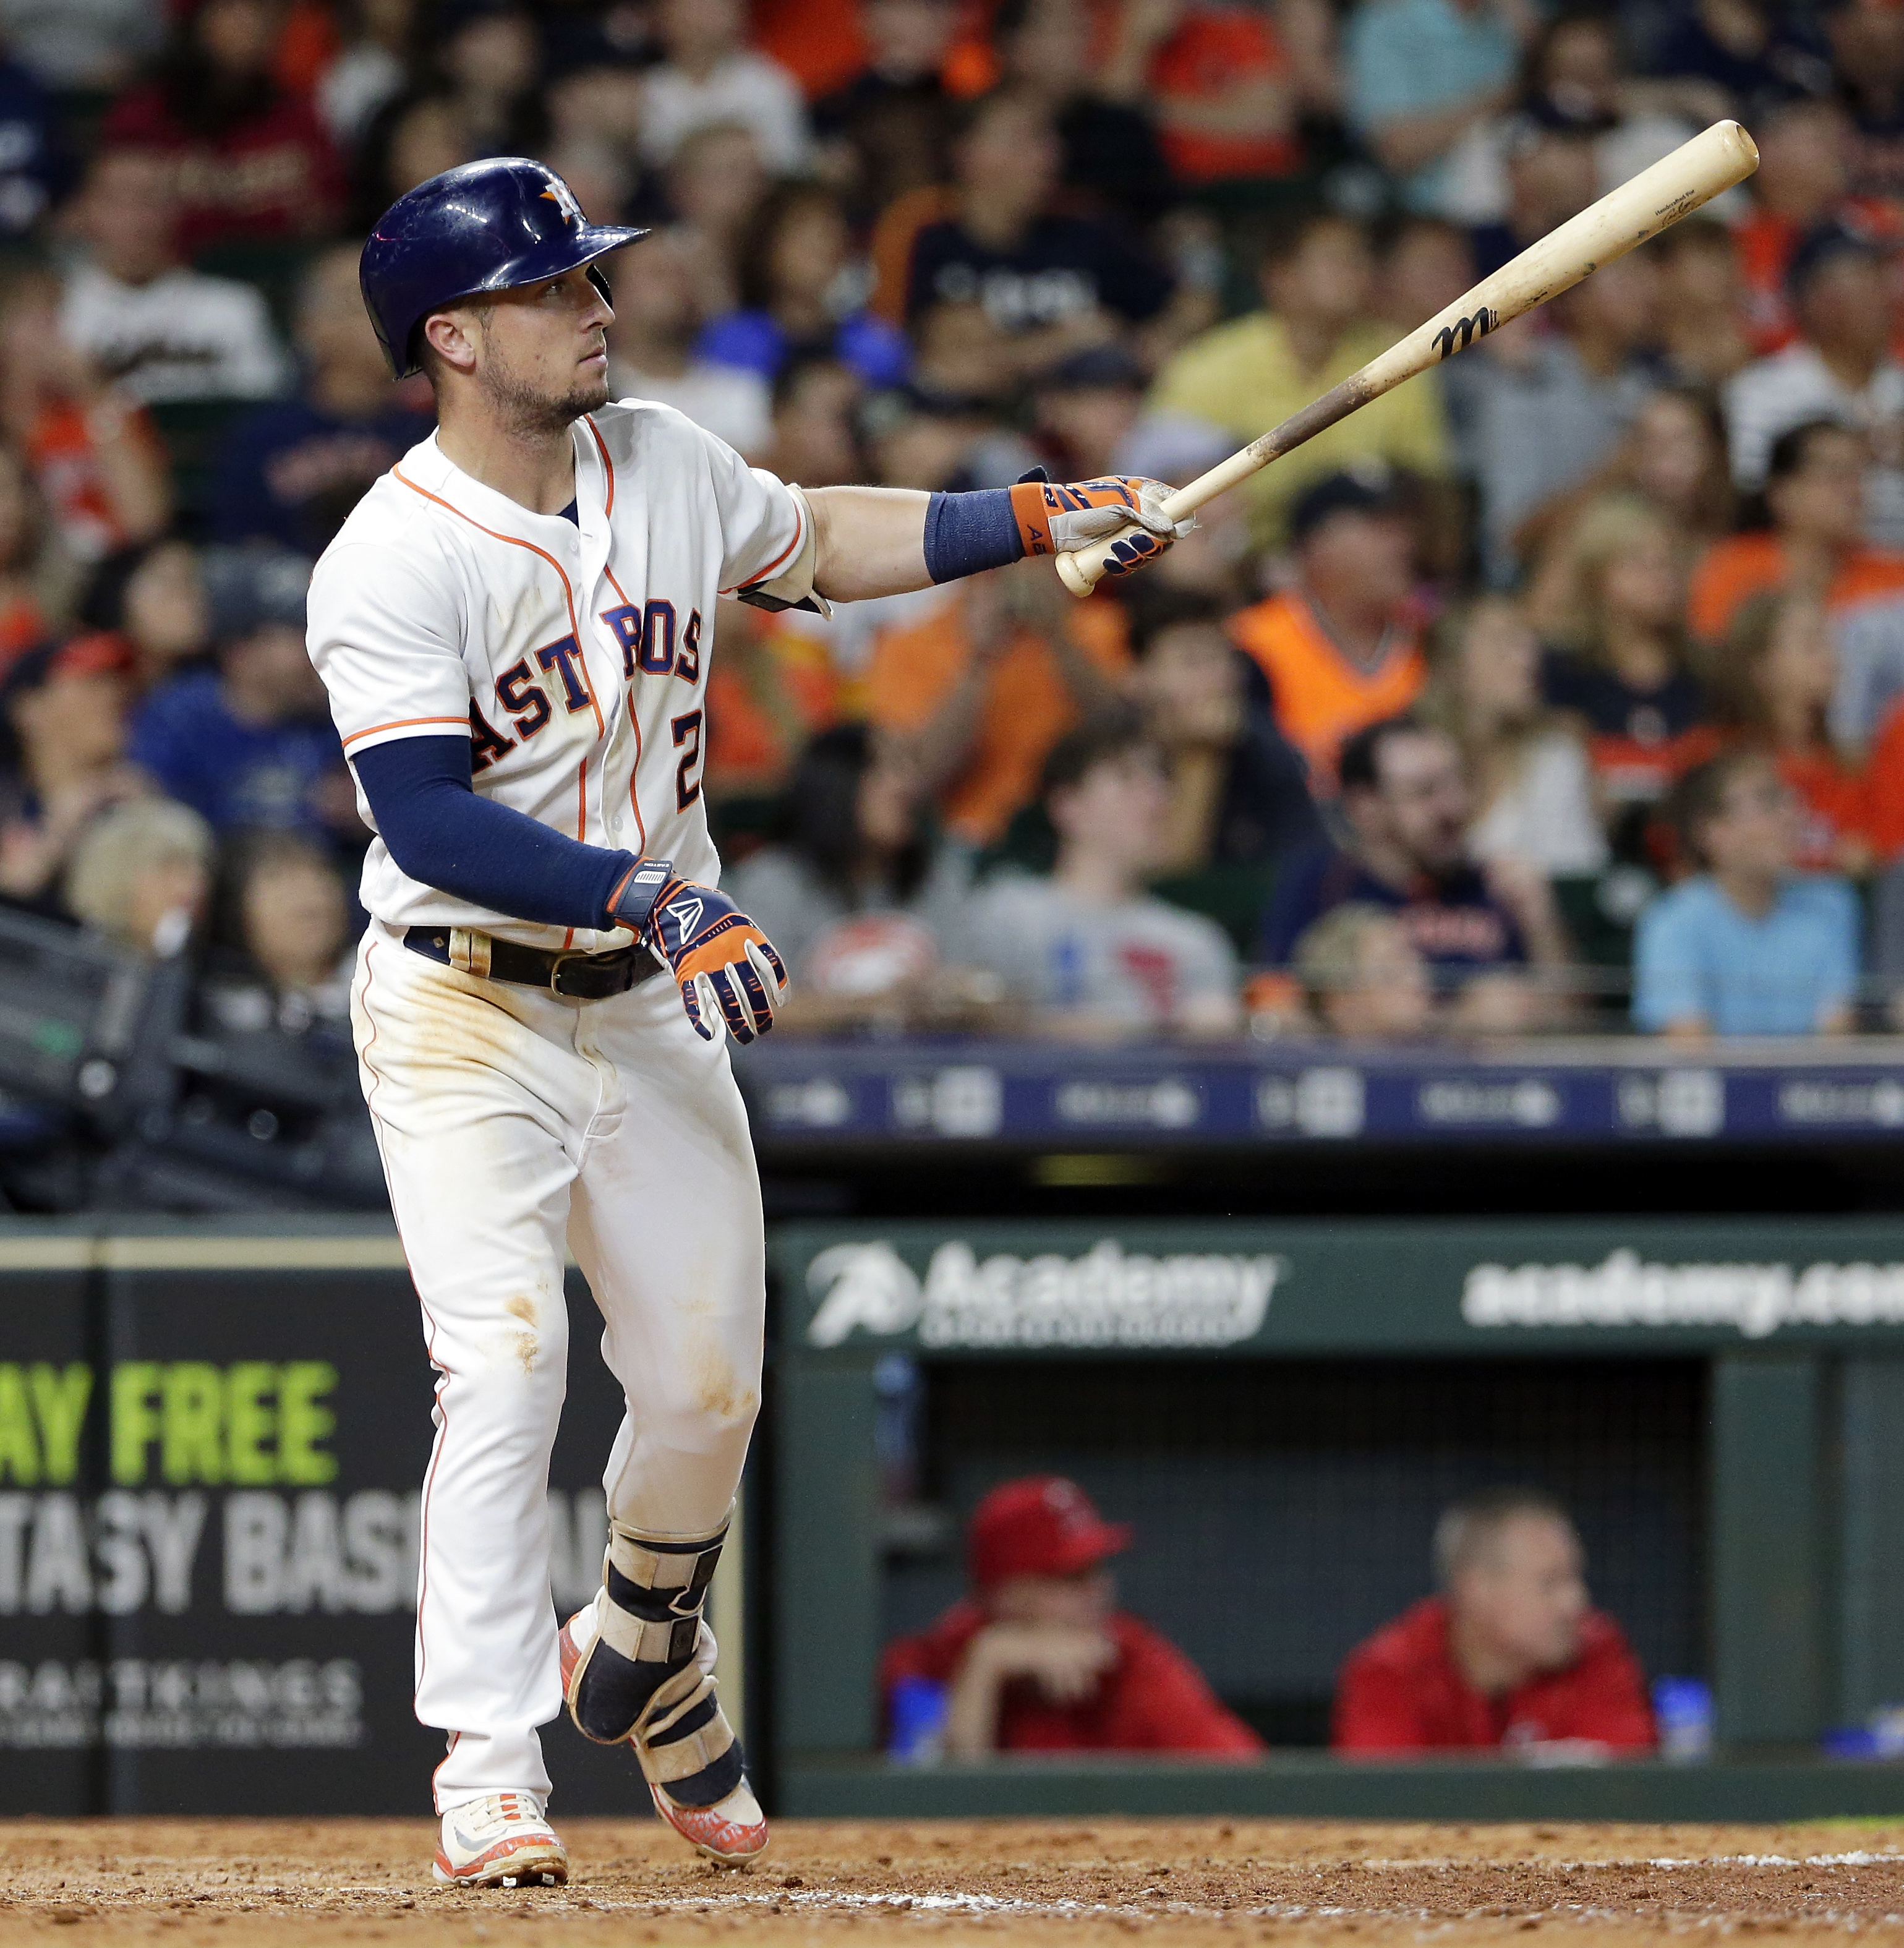 Astros sign Alex Bregman to five-year, $100 million contract extension